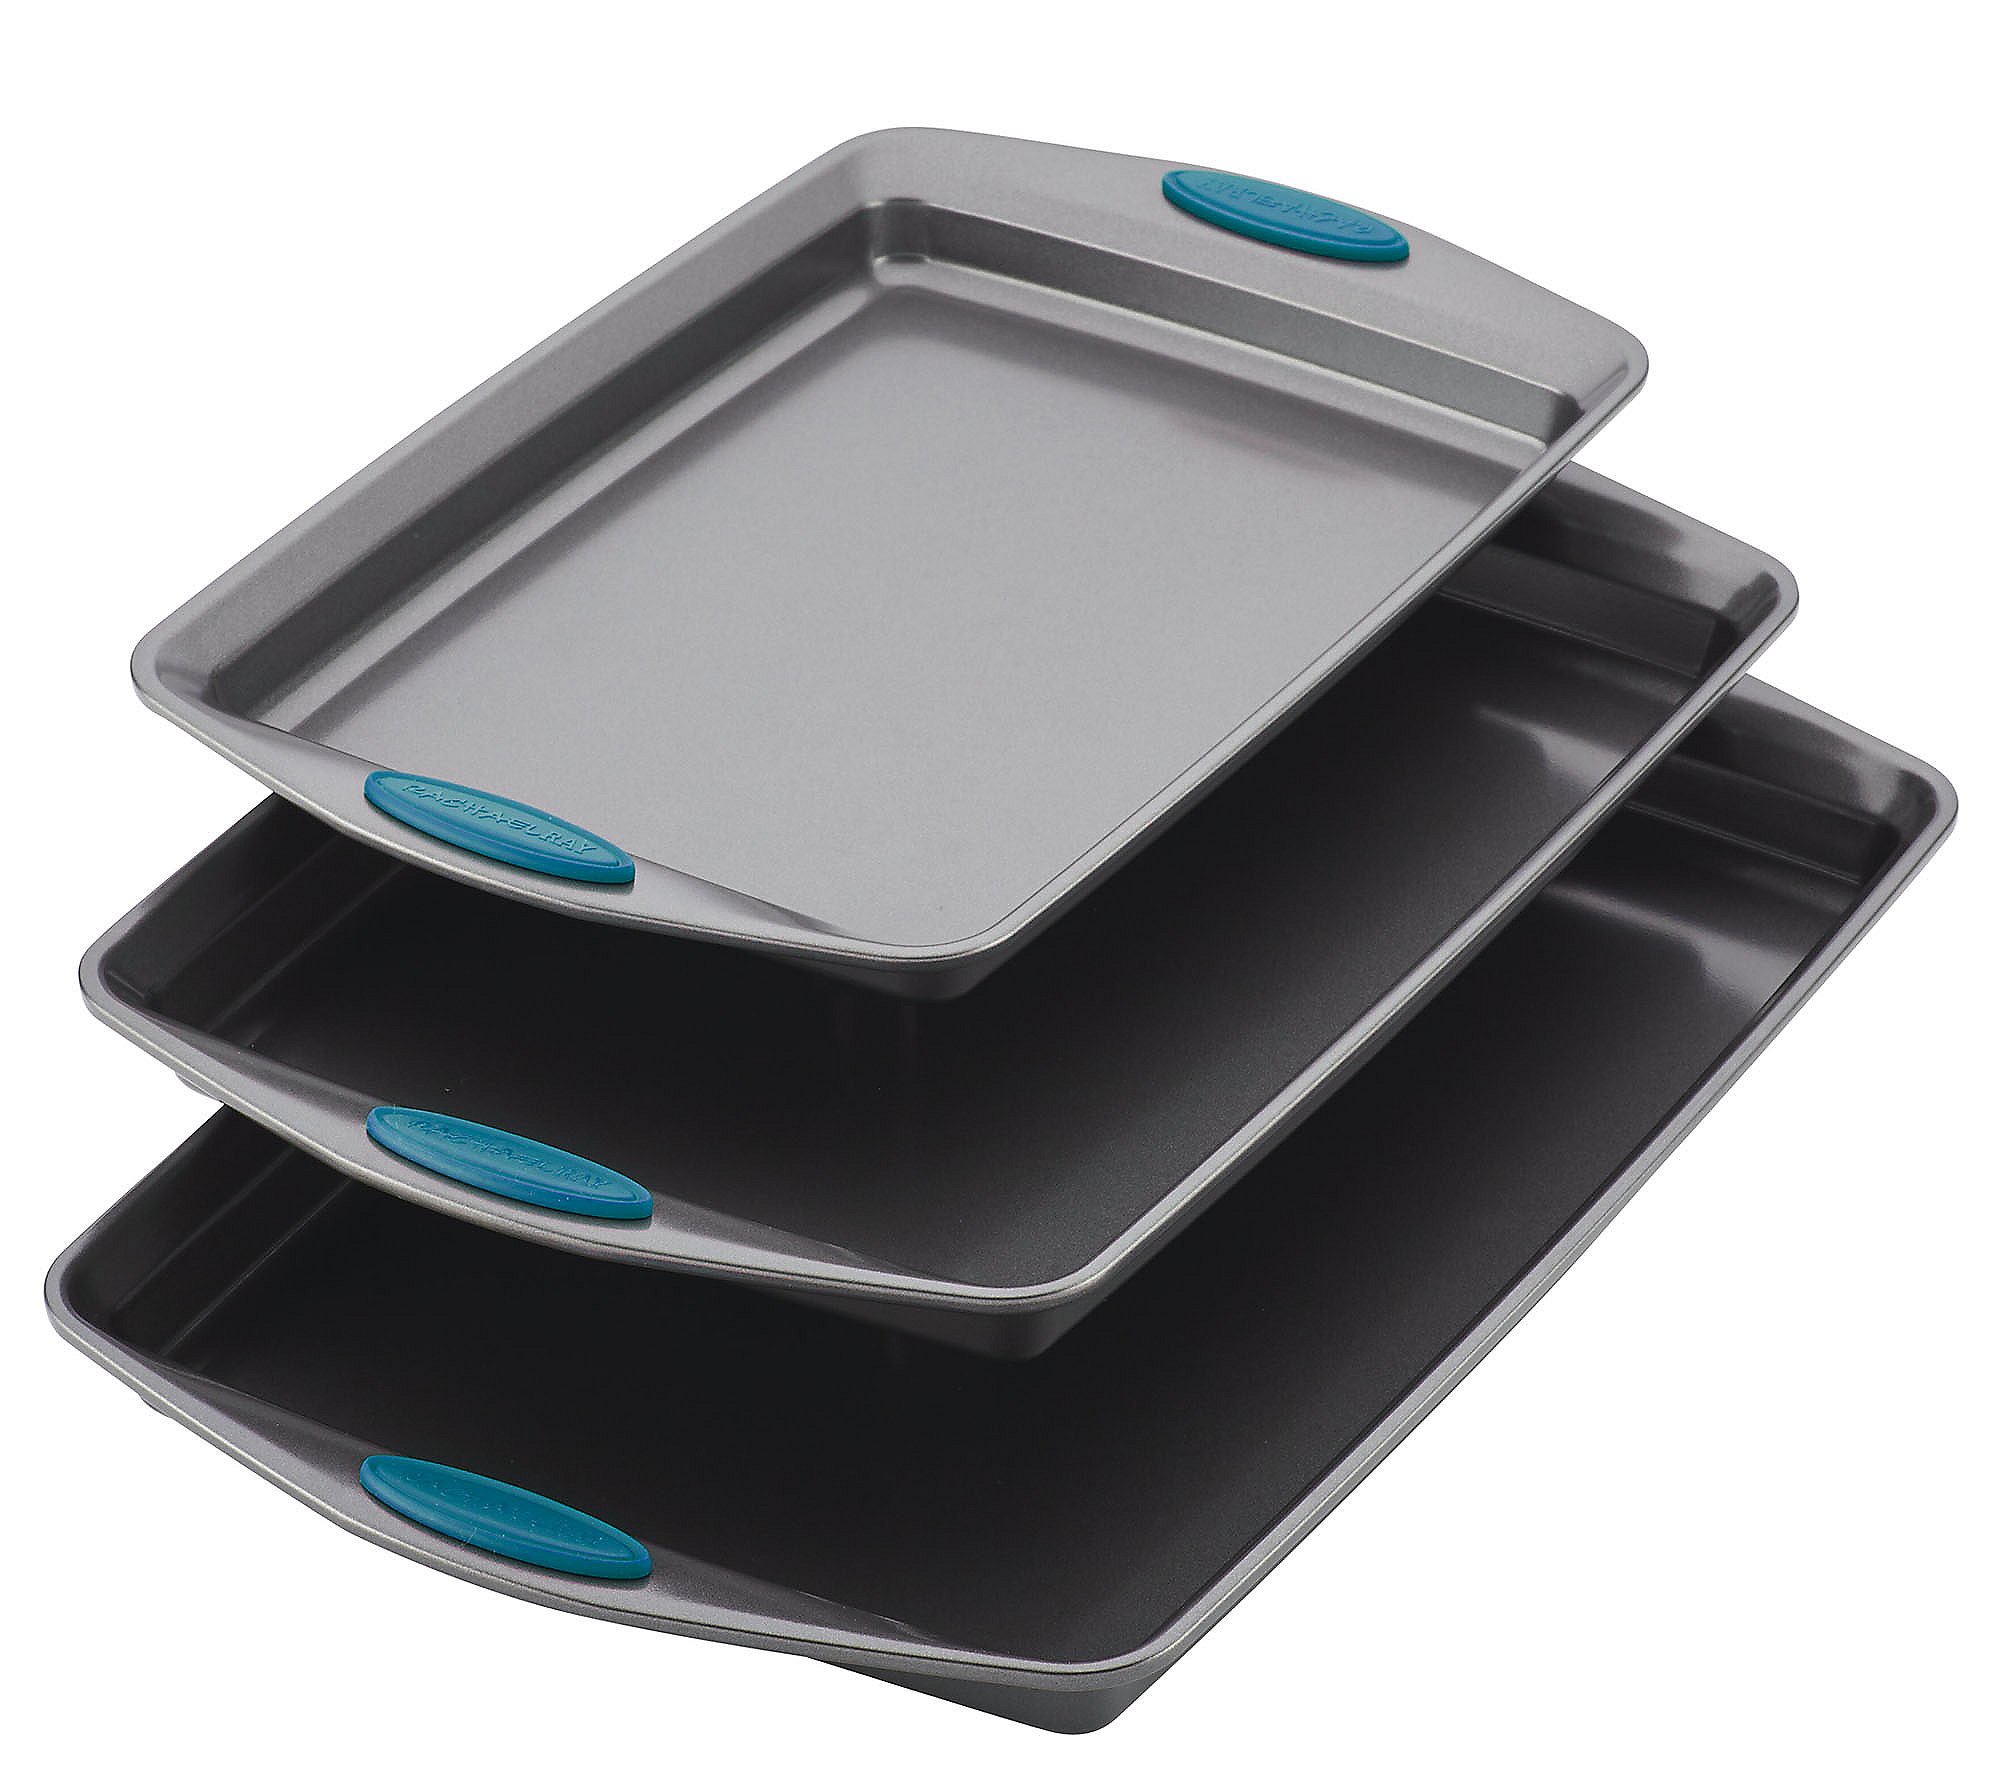 Rachael Ray Bakeware Nonstick Cookie Pan Set 3-Piece Gray with Marine Blue Grips 